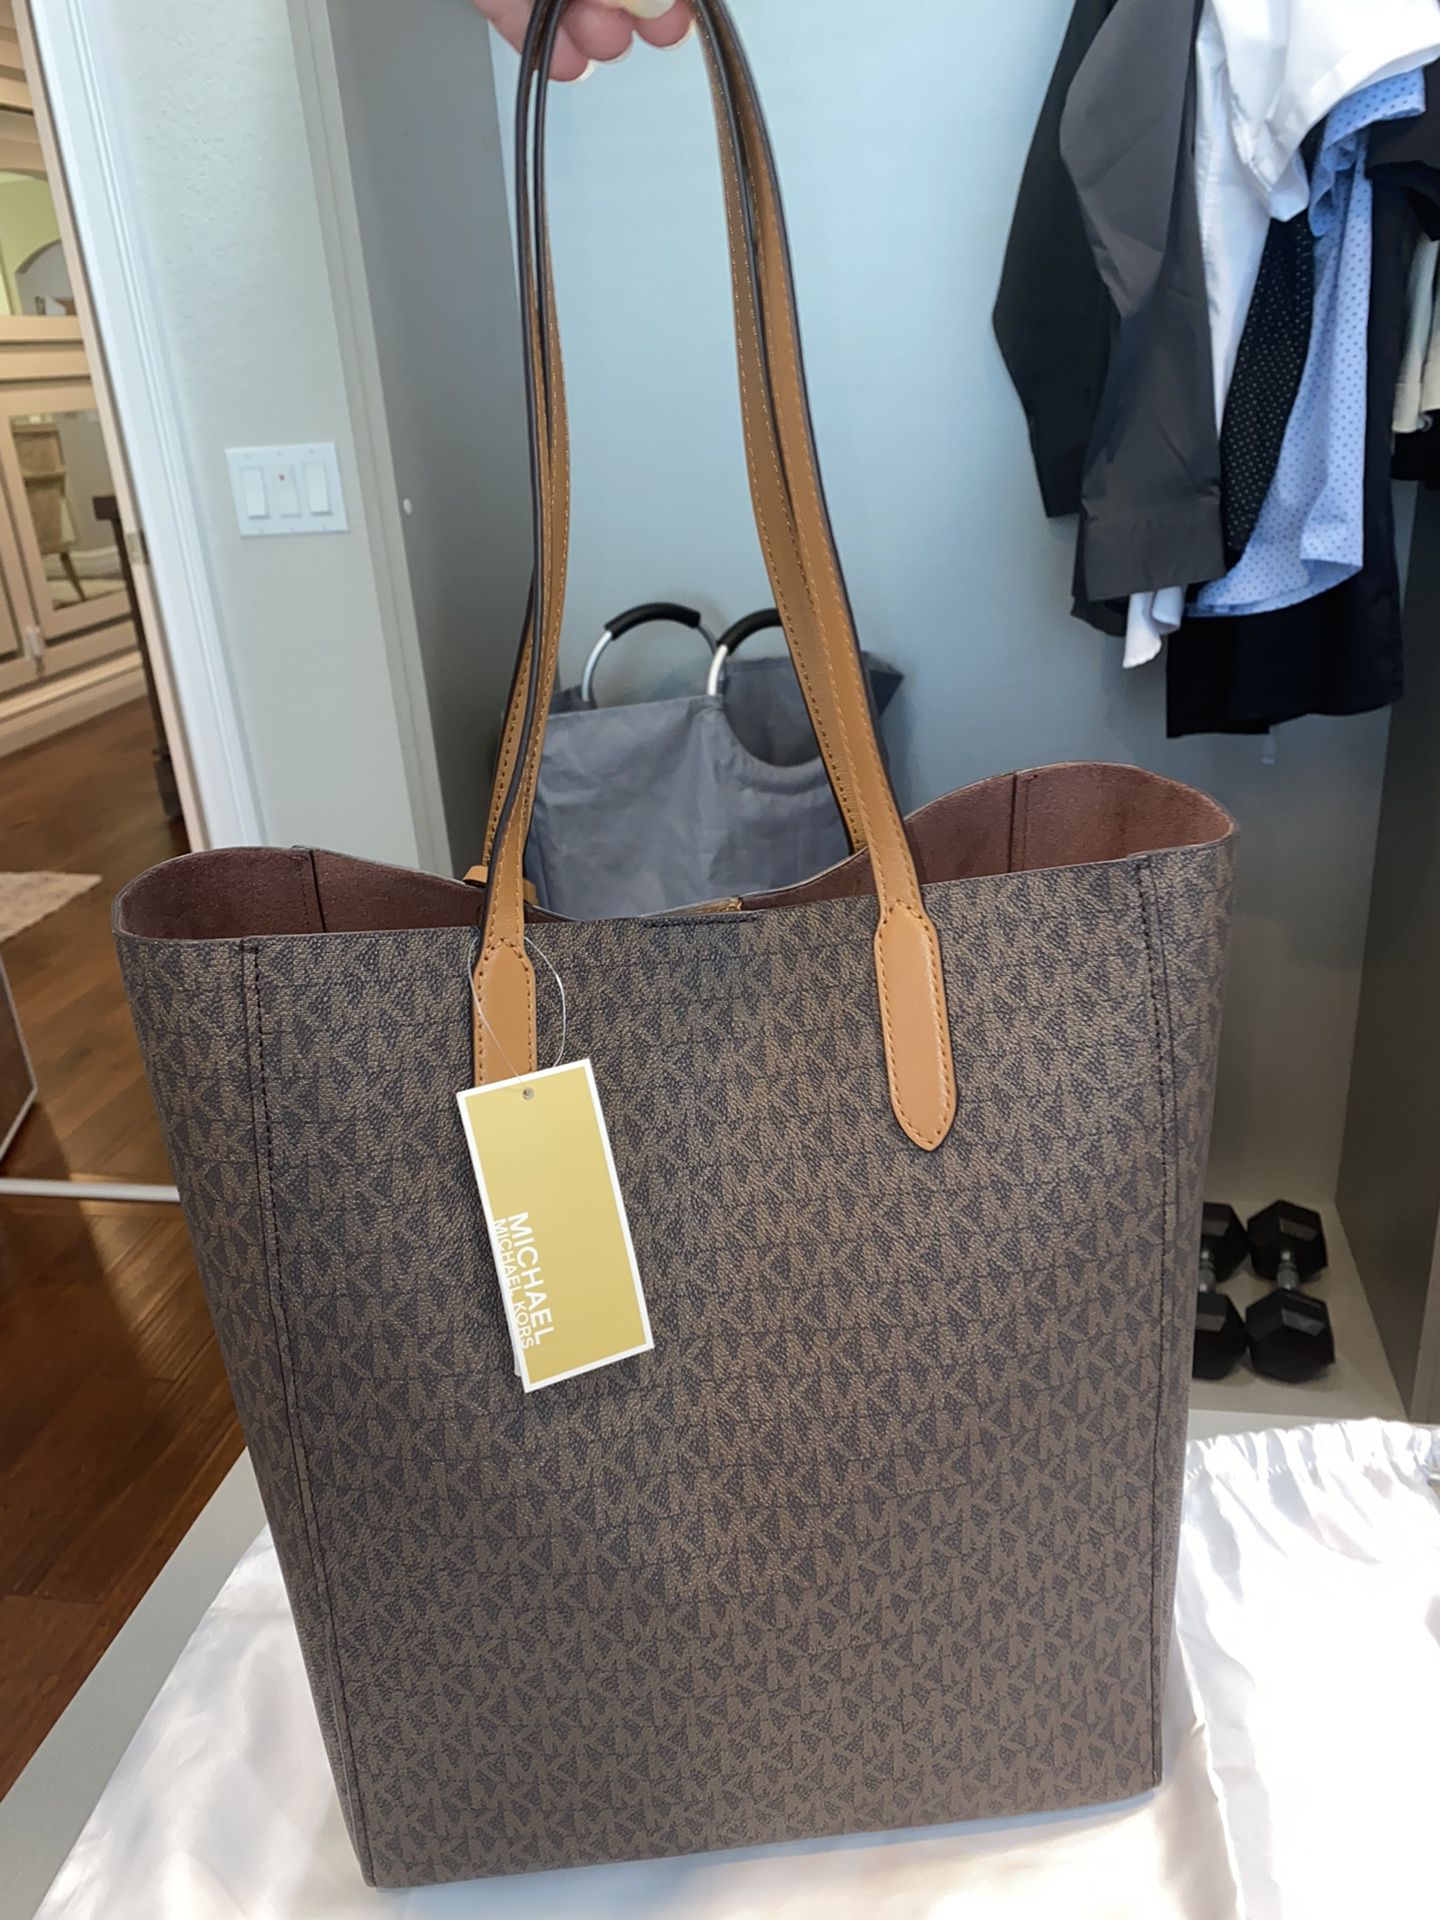 Michael Kors Large CHANTAL Tote for Sale in Clearwater, FL - OfferUp